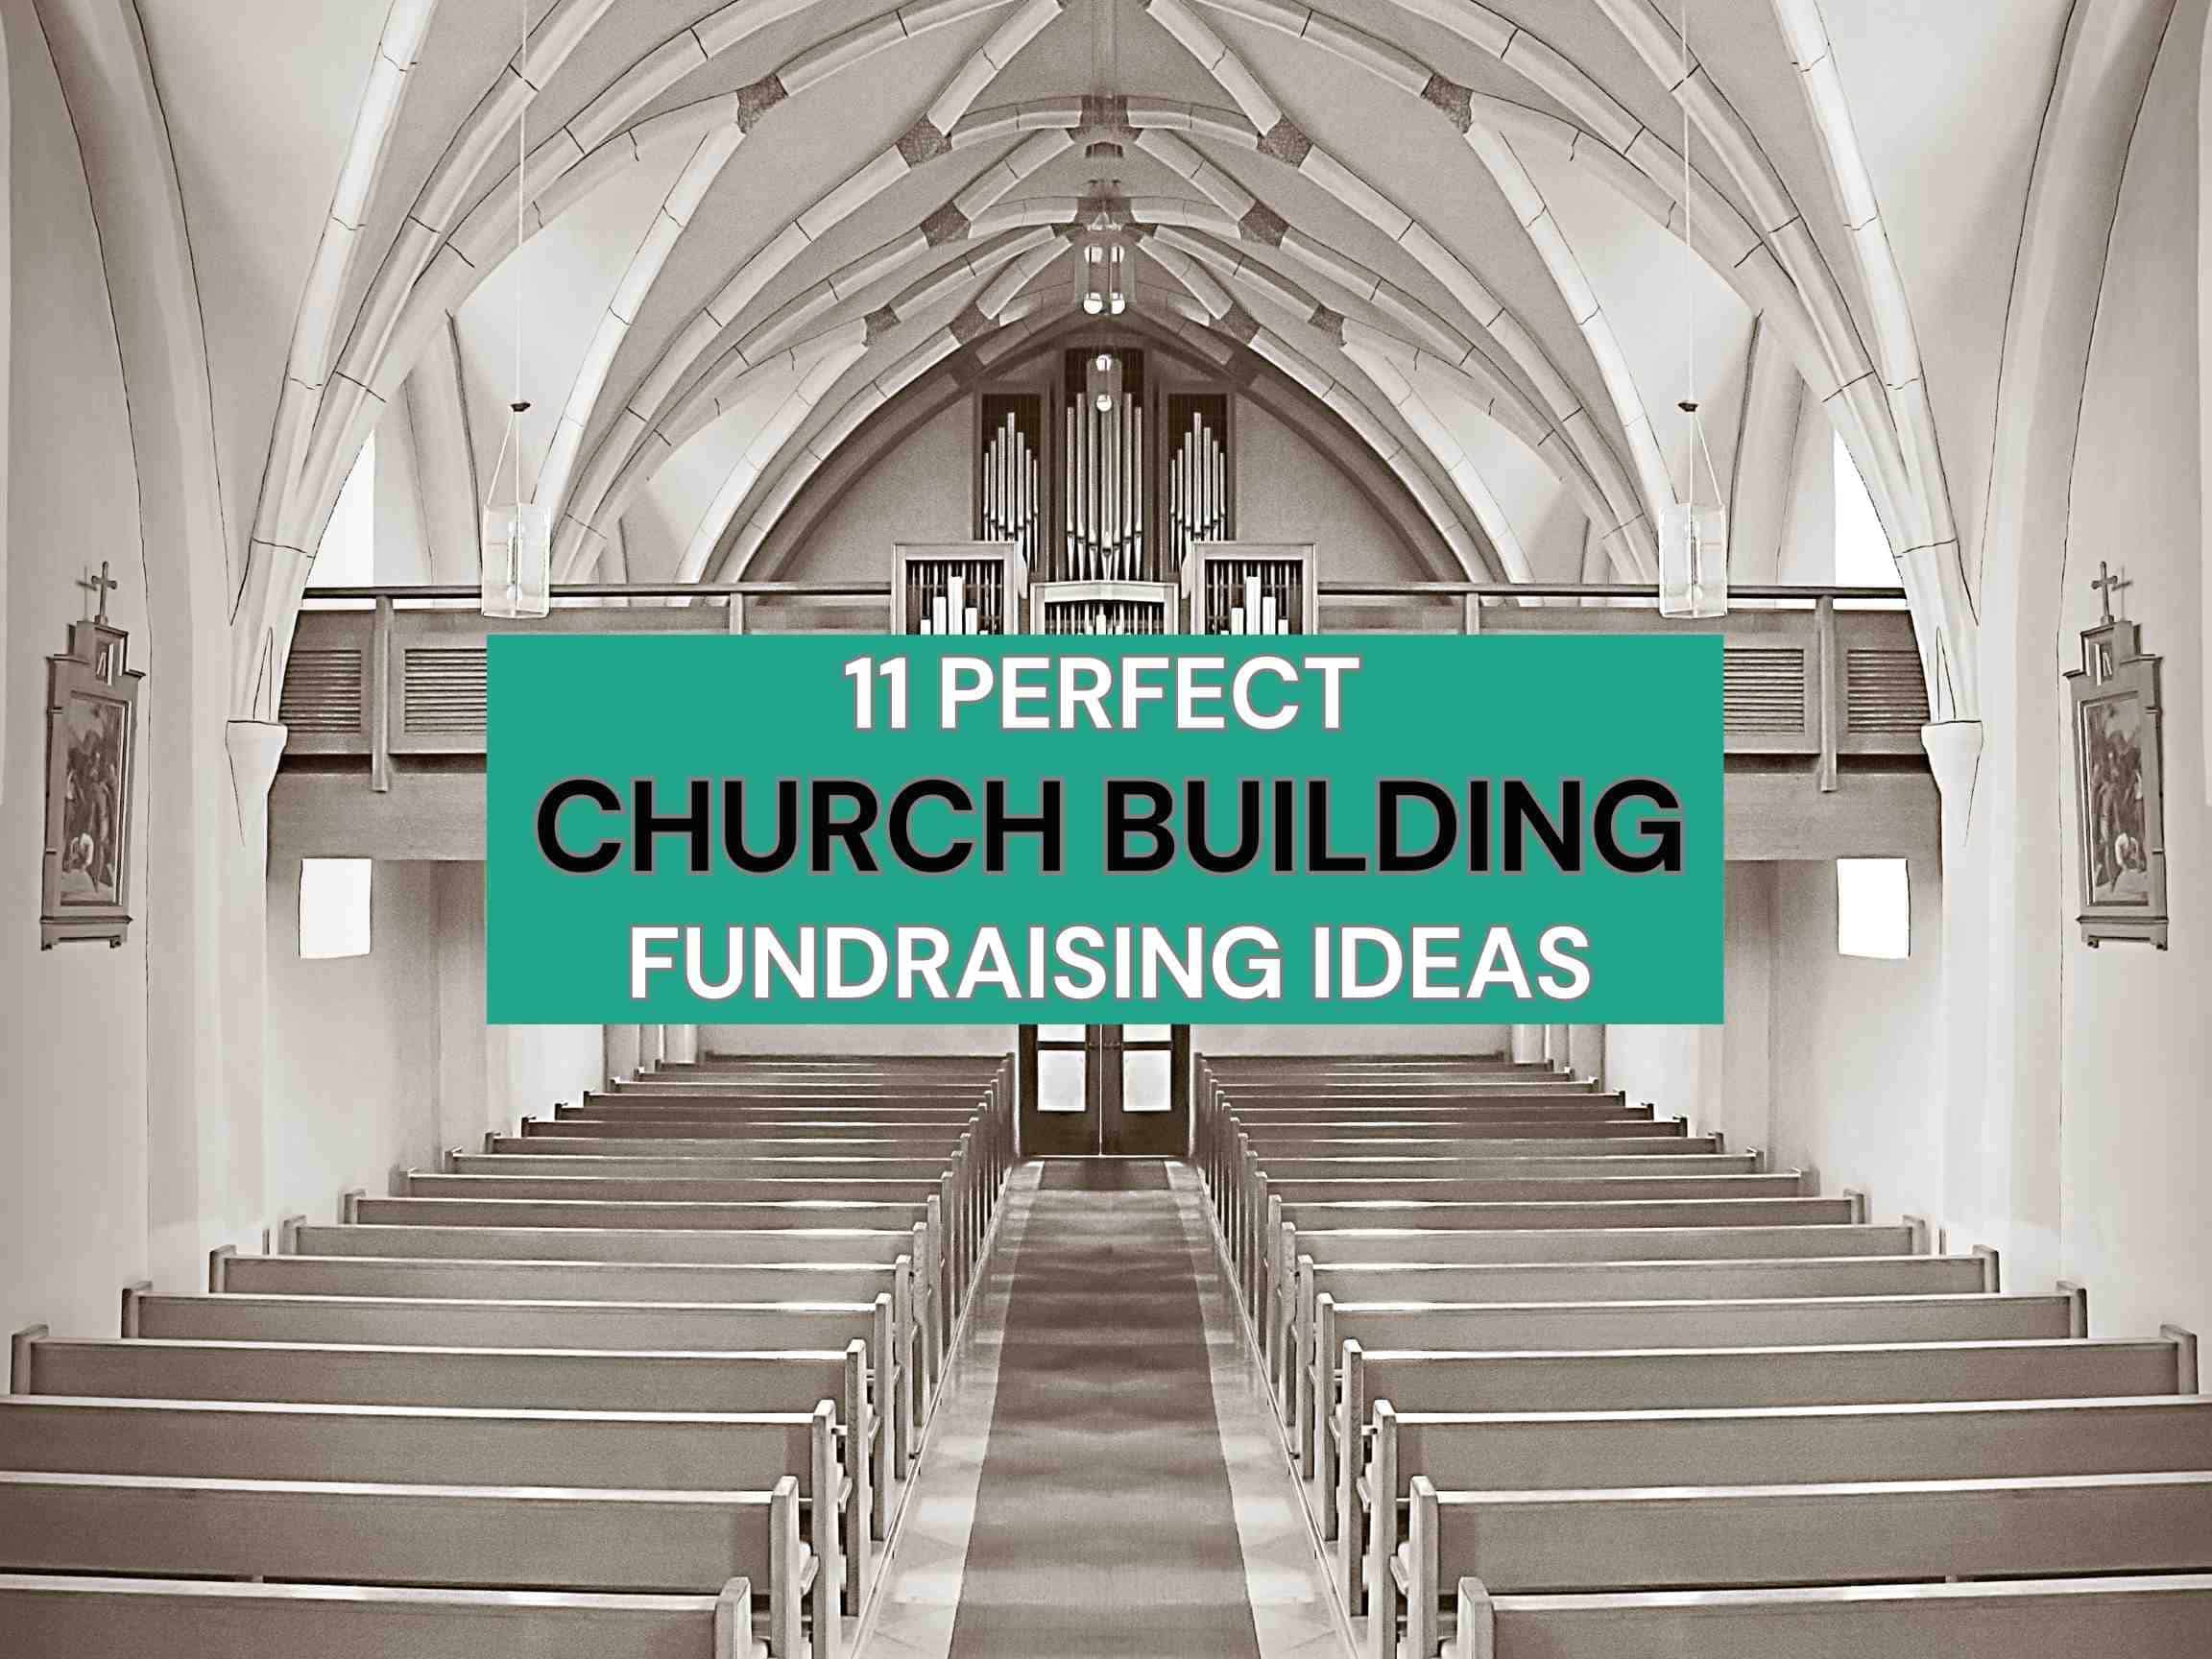 Church building fundraising ideas - image of the inside of a white church